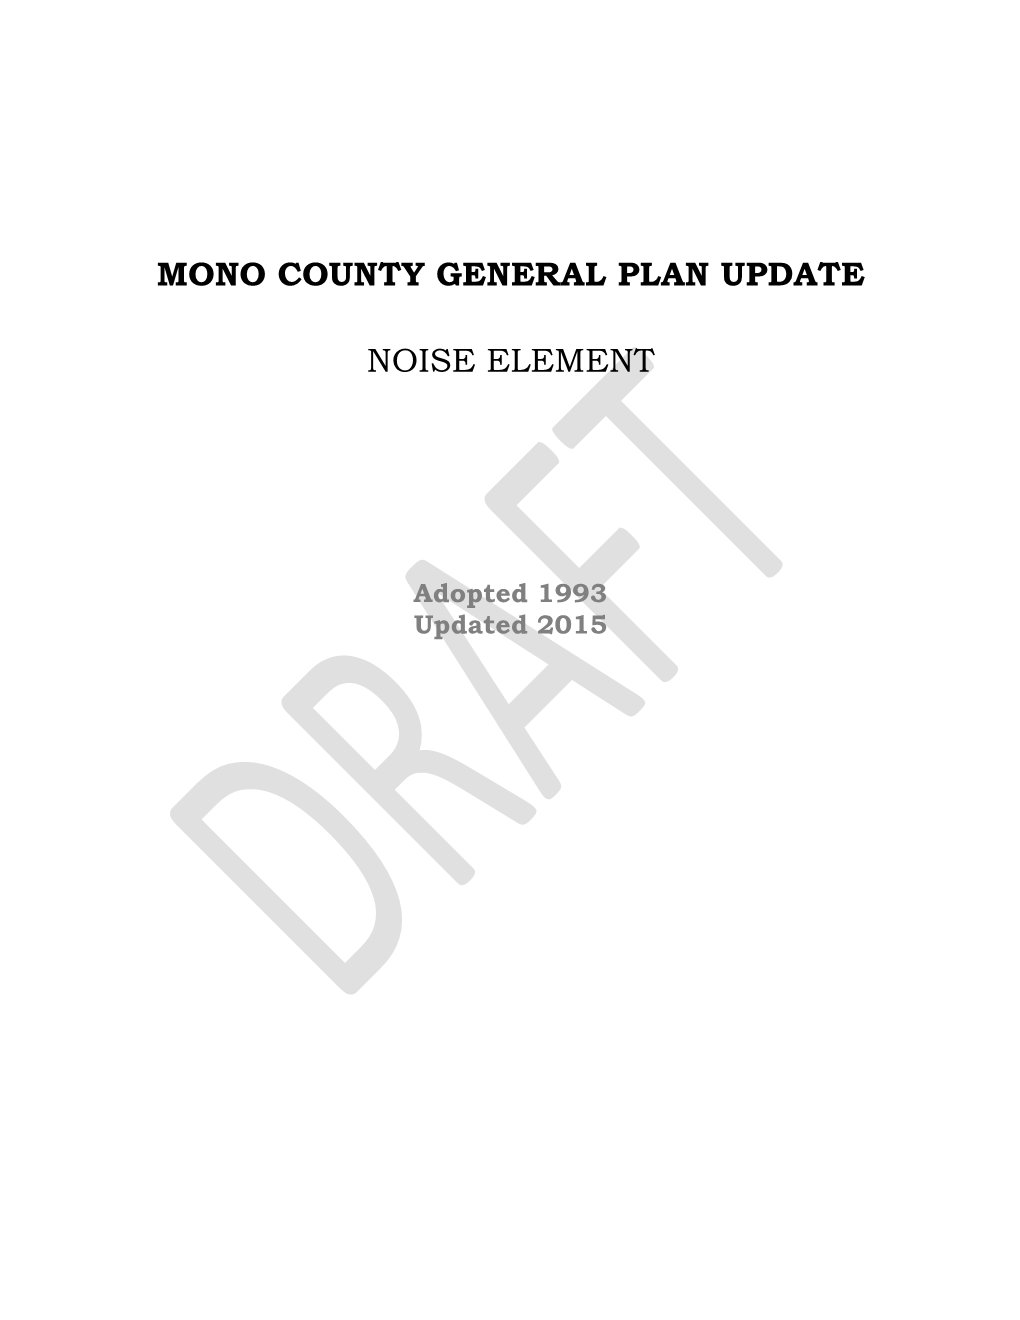 Mono County General Plan Update Noise Element